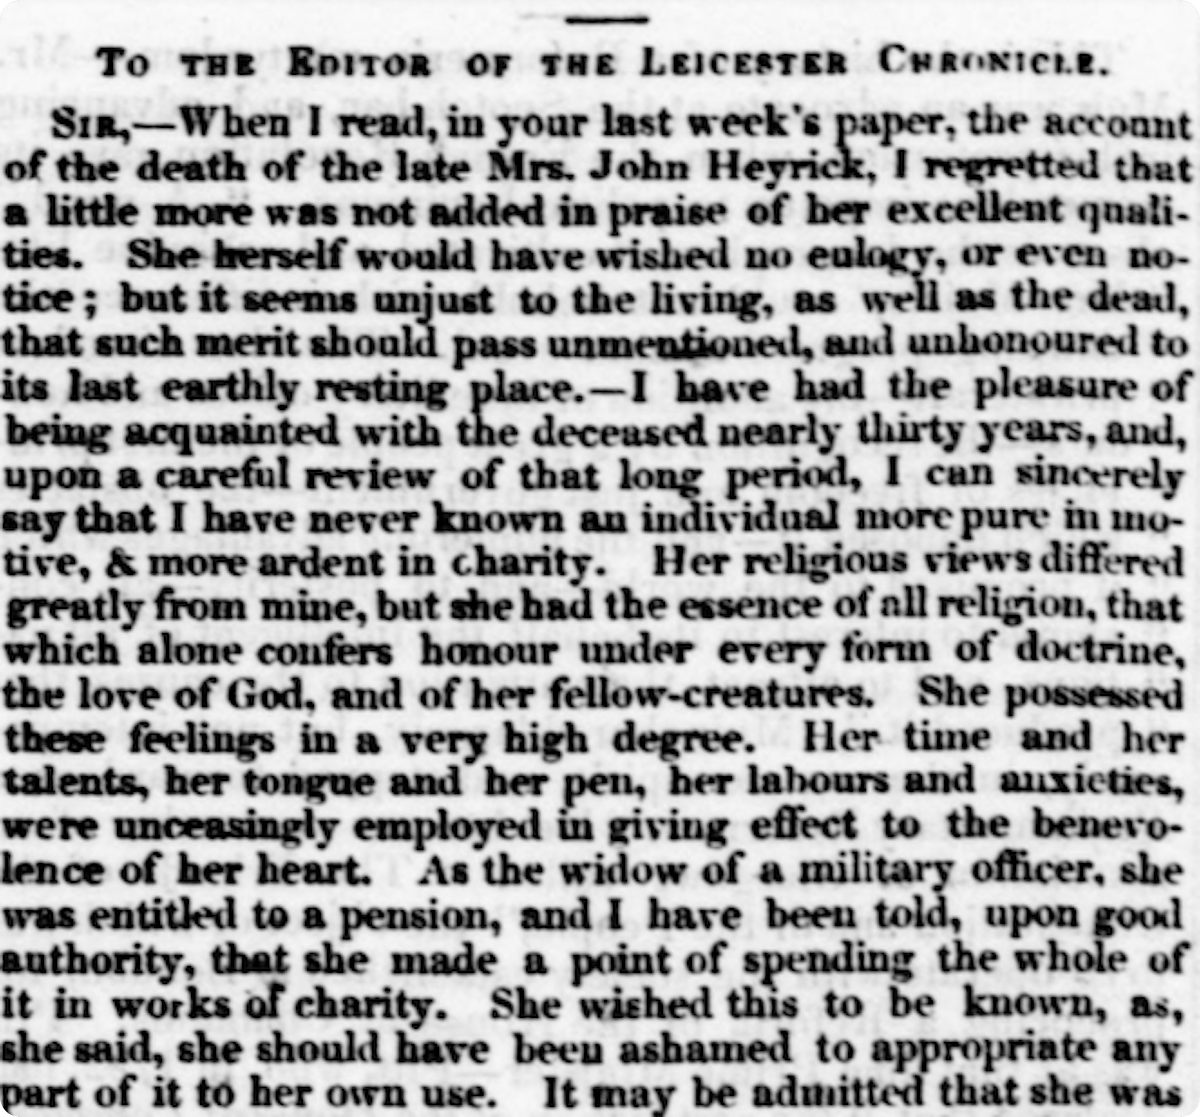 A dedication to Elizabeth Heyrick in the Leicester Chronicle.